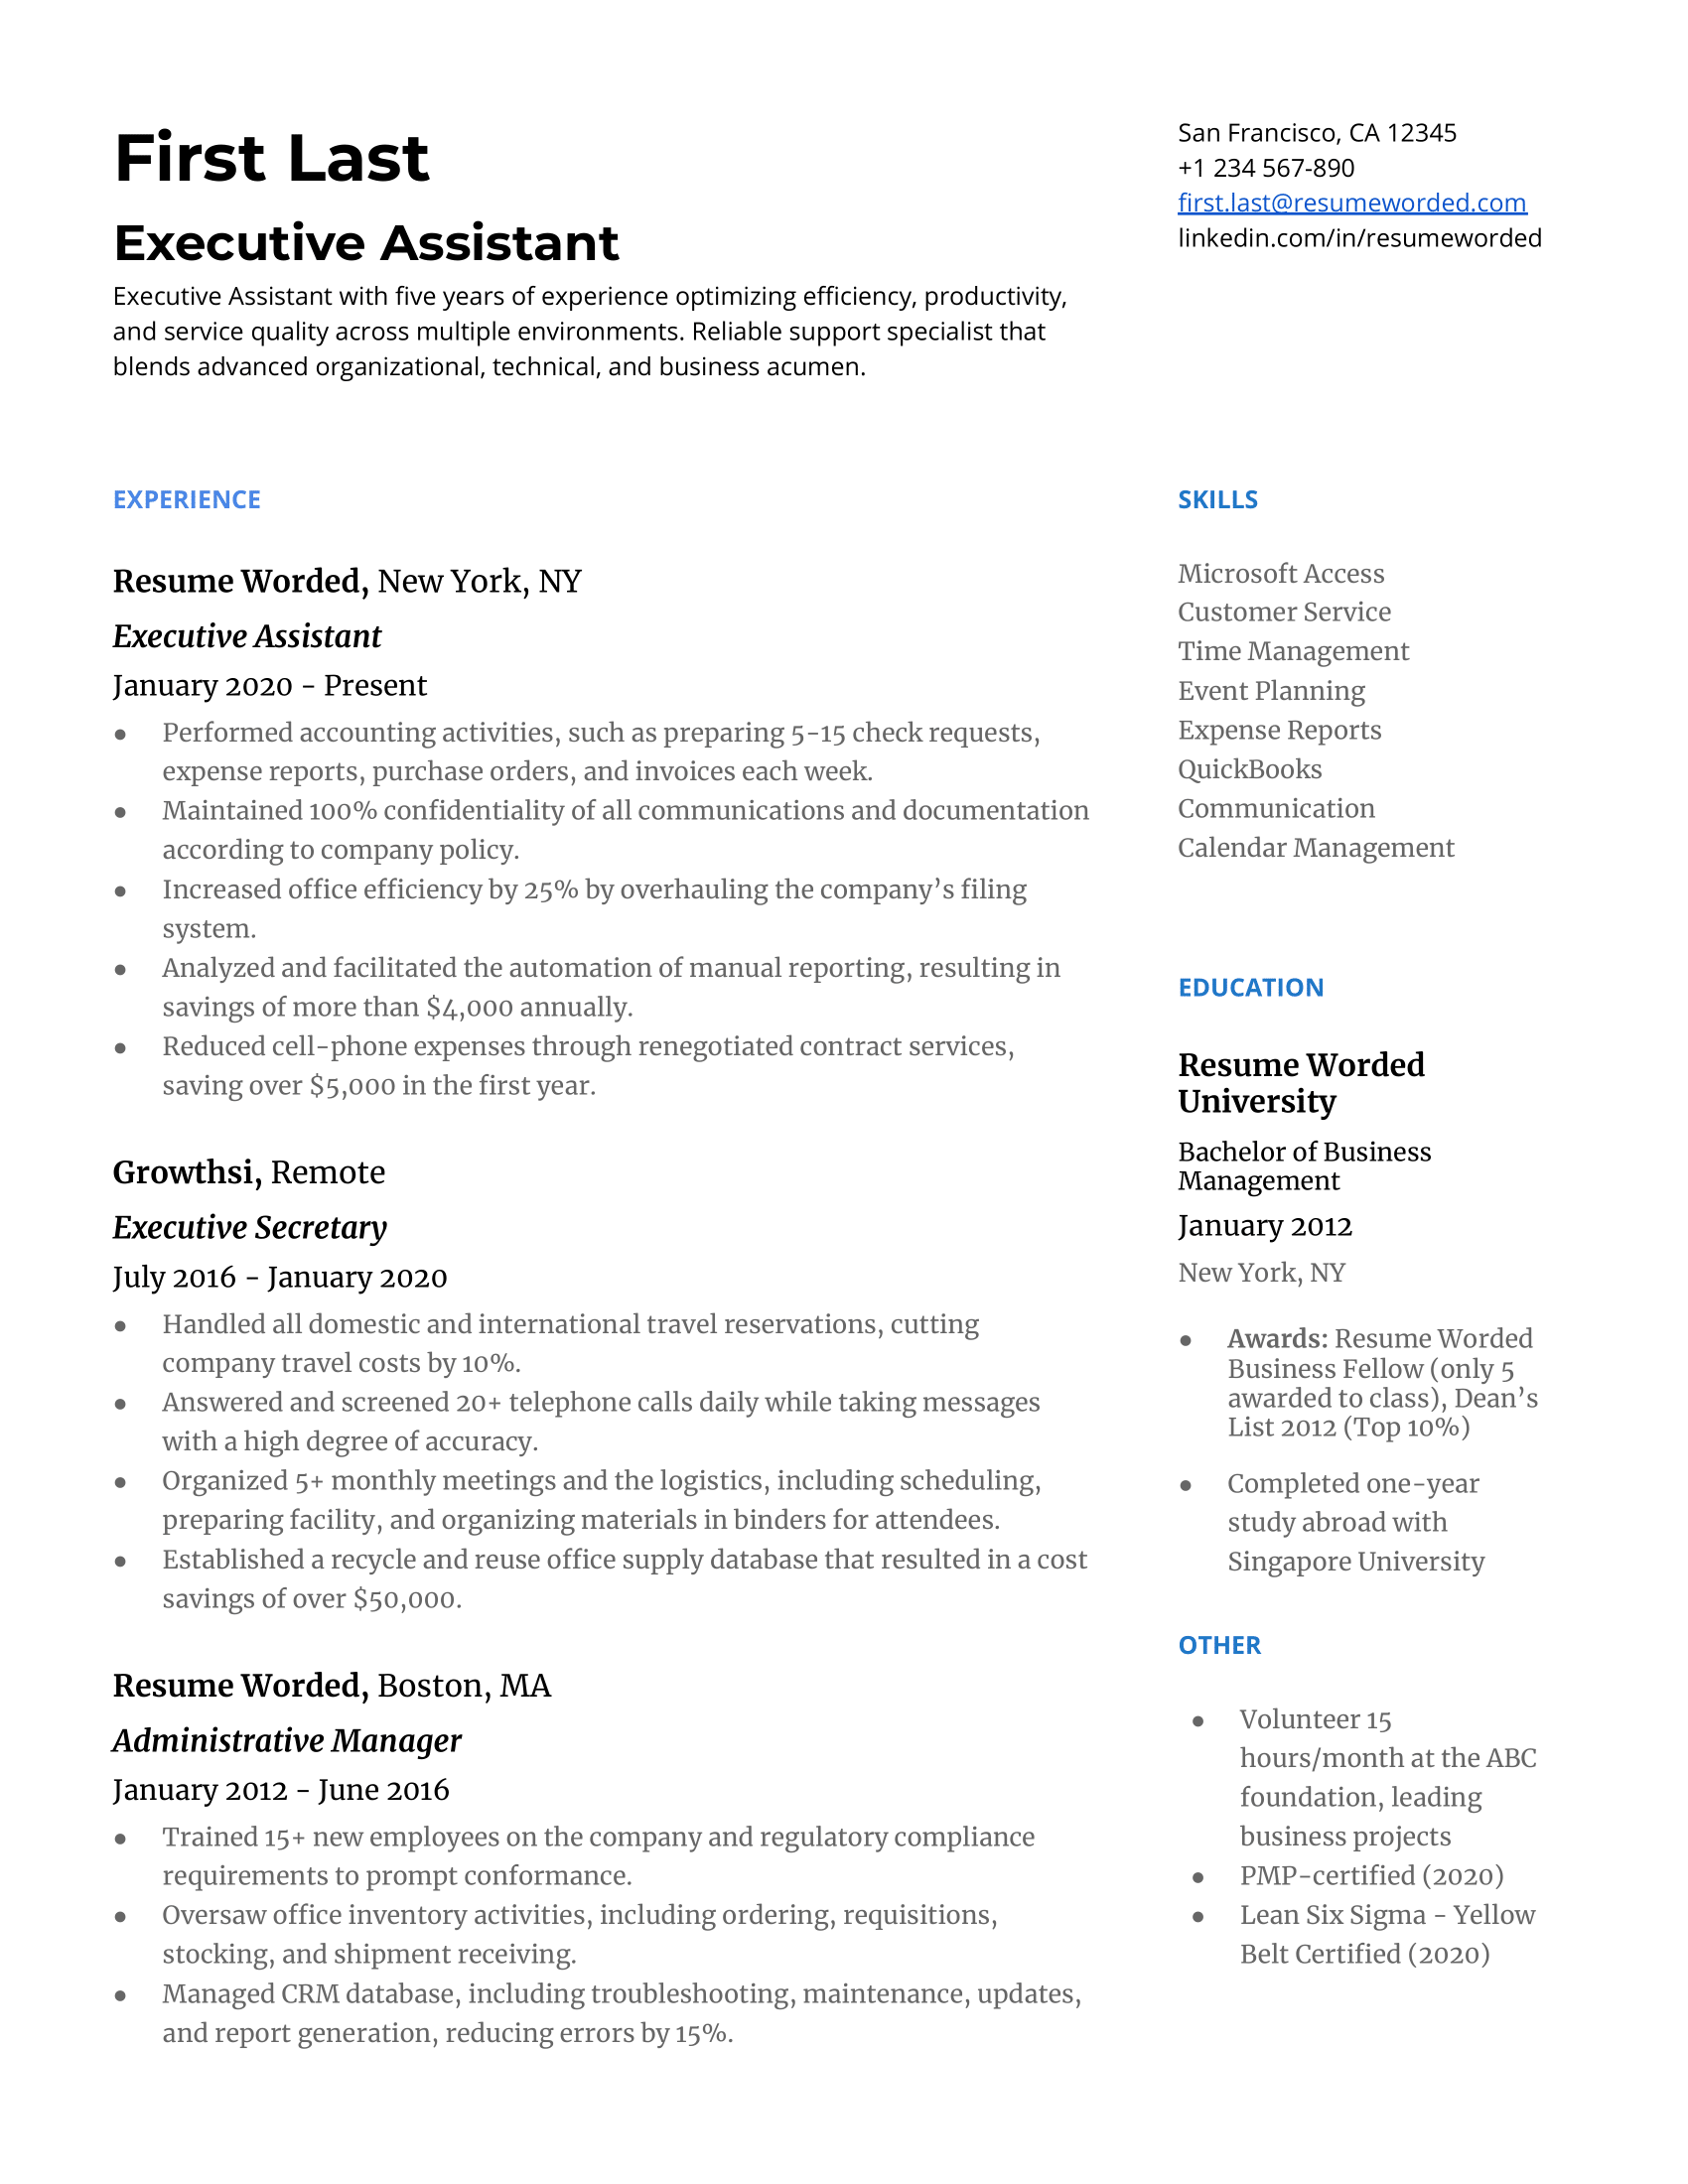 An executive assistant resume template including techniques, skills, and software they have on their toolkit.